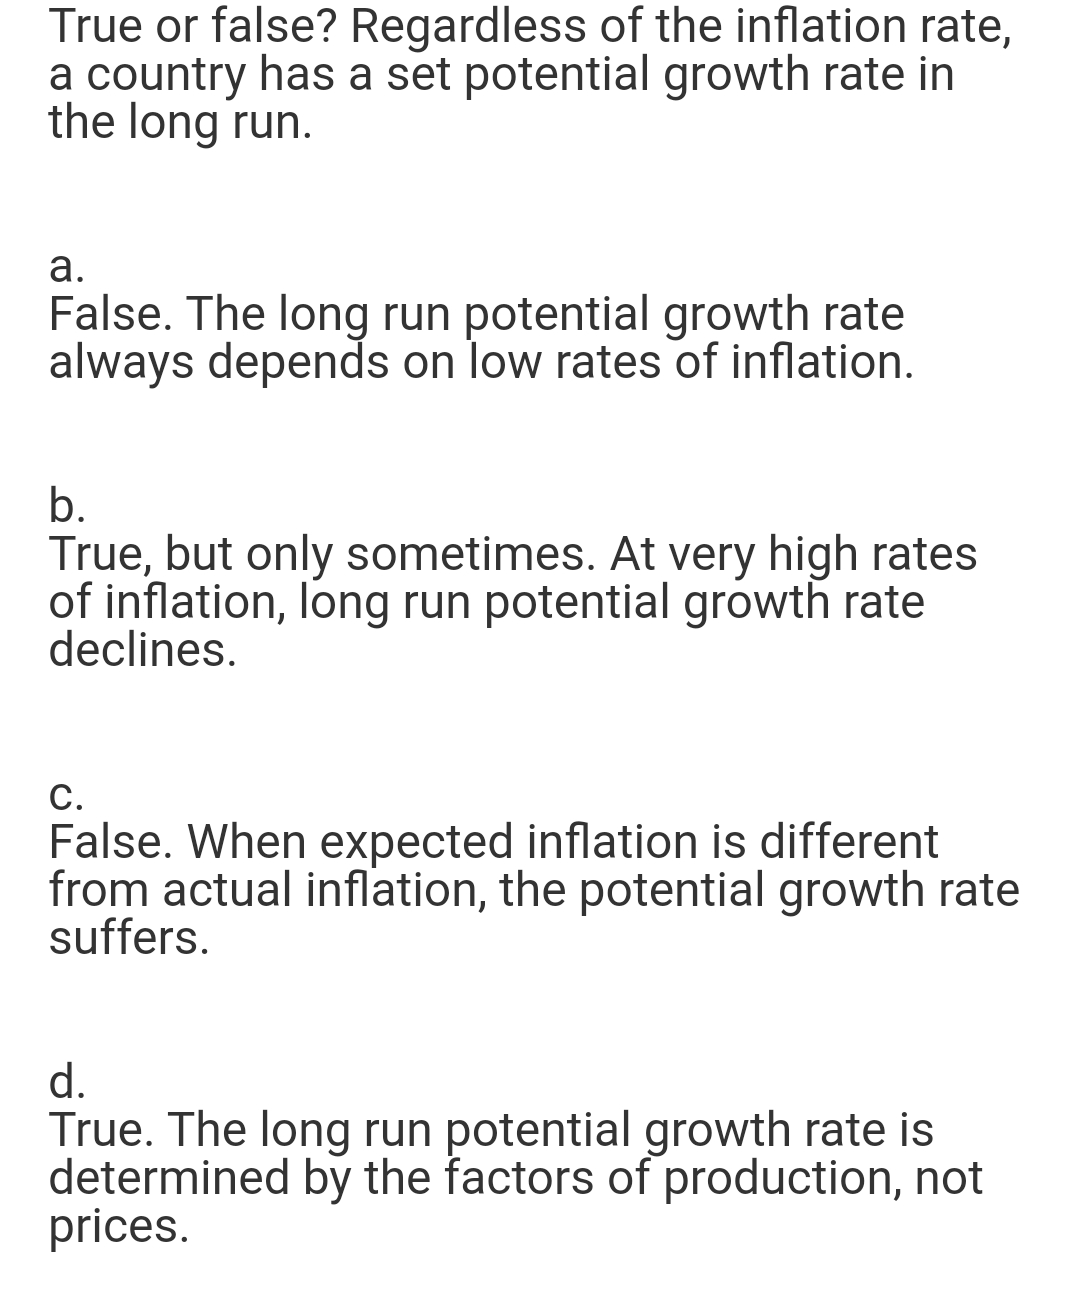 True or false? Regardless of the inflation rate,
a country has a set potential growth rate in
the long run.
a.
False. The long run potential growth rate
always depends on low rates of inflation.
b.
True, but only sometimes. At very high rates
of inflation, long run potential growth rate
declines.
C.
False. When expected inflation is different
from actual inflation, the potential growth rate
suffers.
d.
True. The long run potential growth rate is
determined by the factors of production, not
prices.